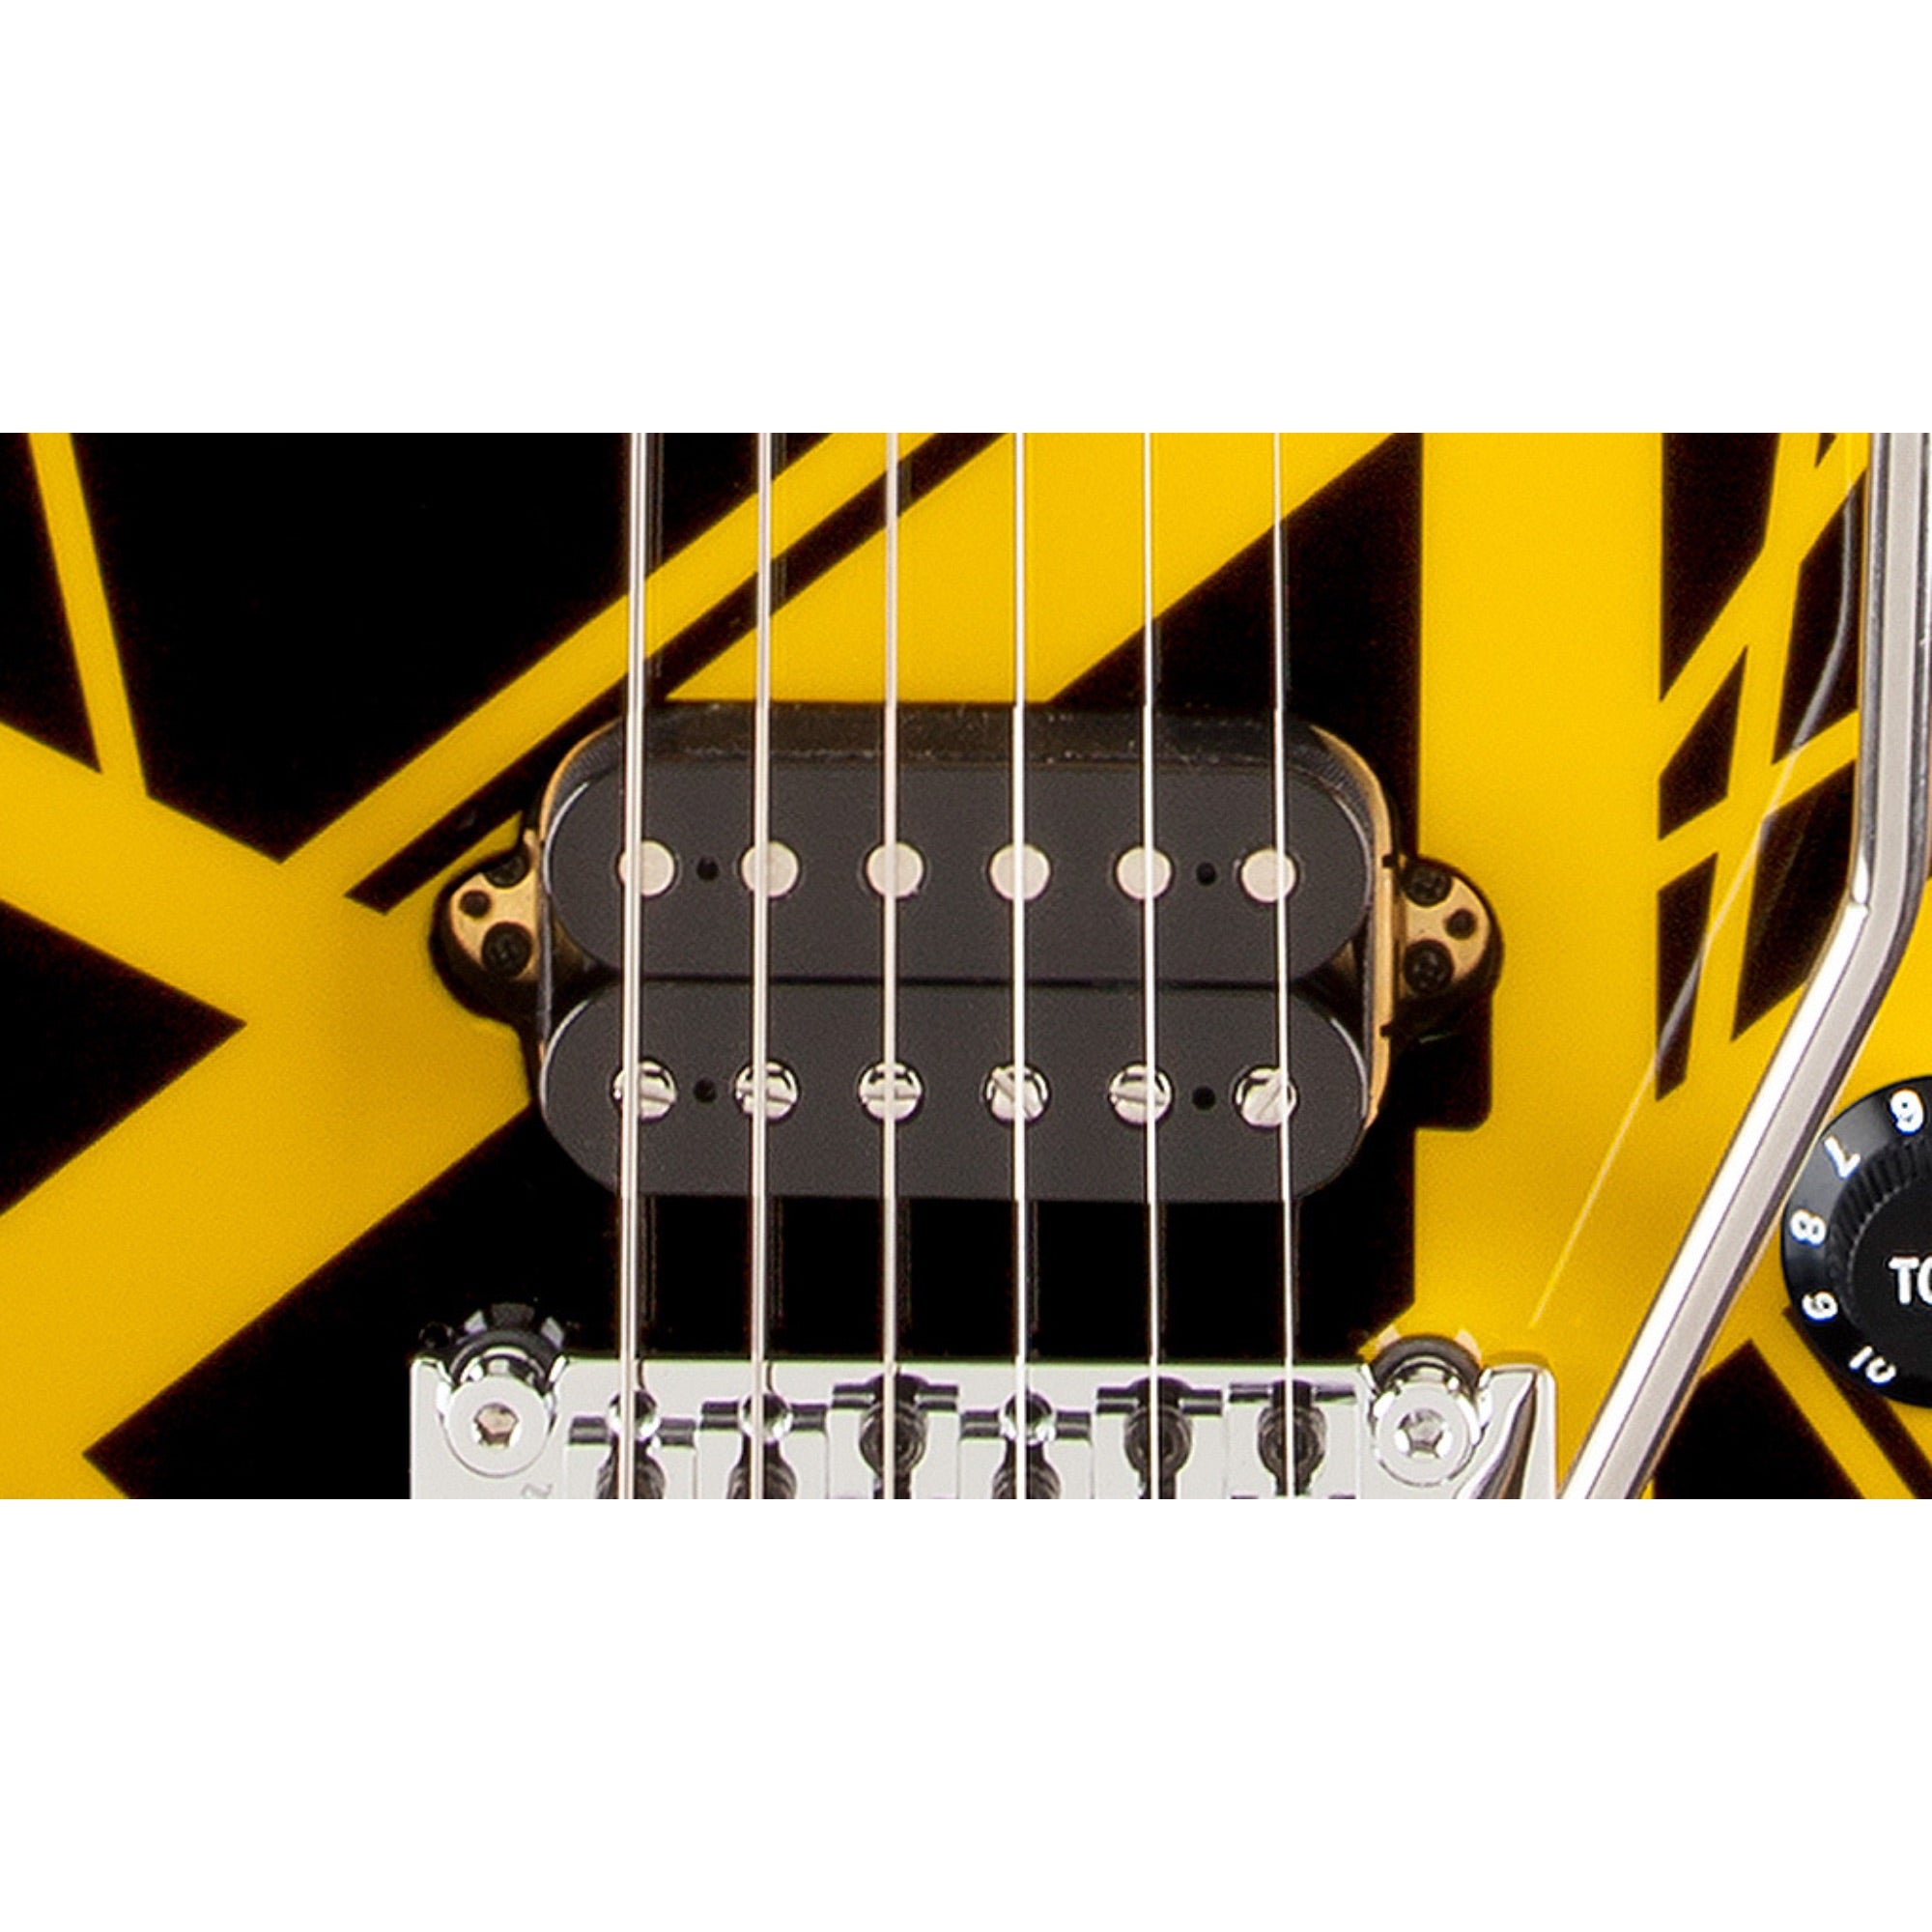 EVH Striped Series Guitar, Black with Yellow Stripes